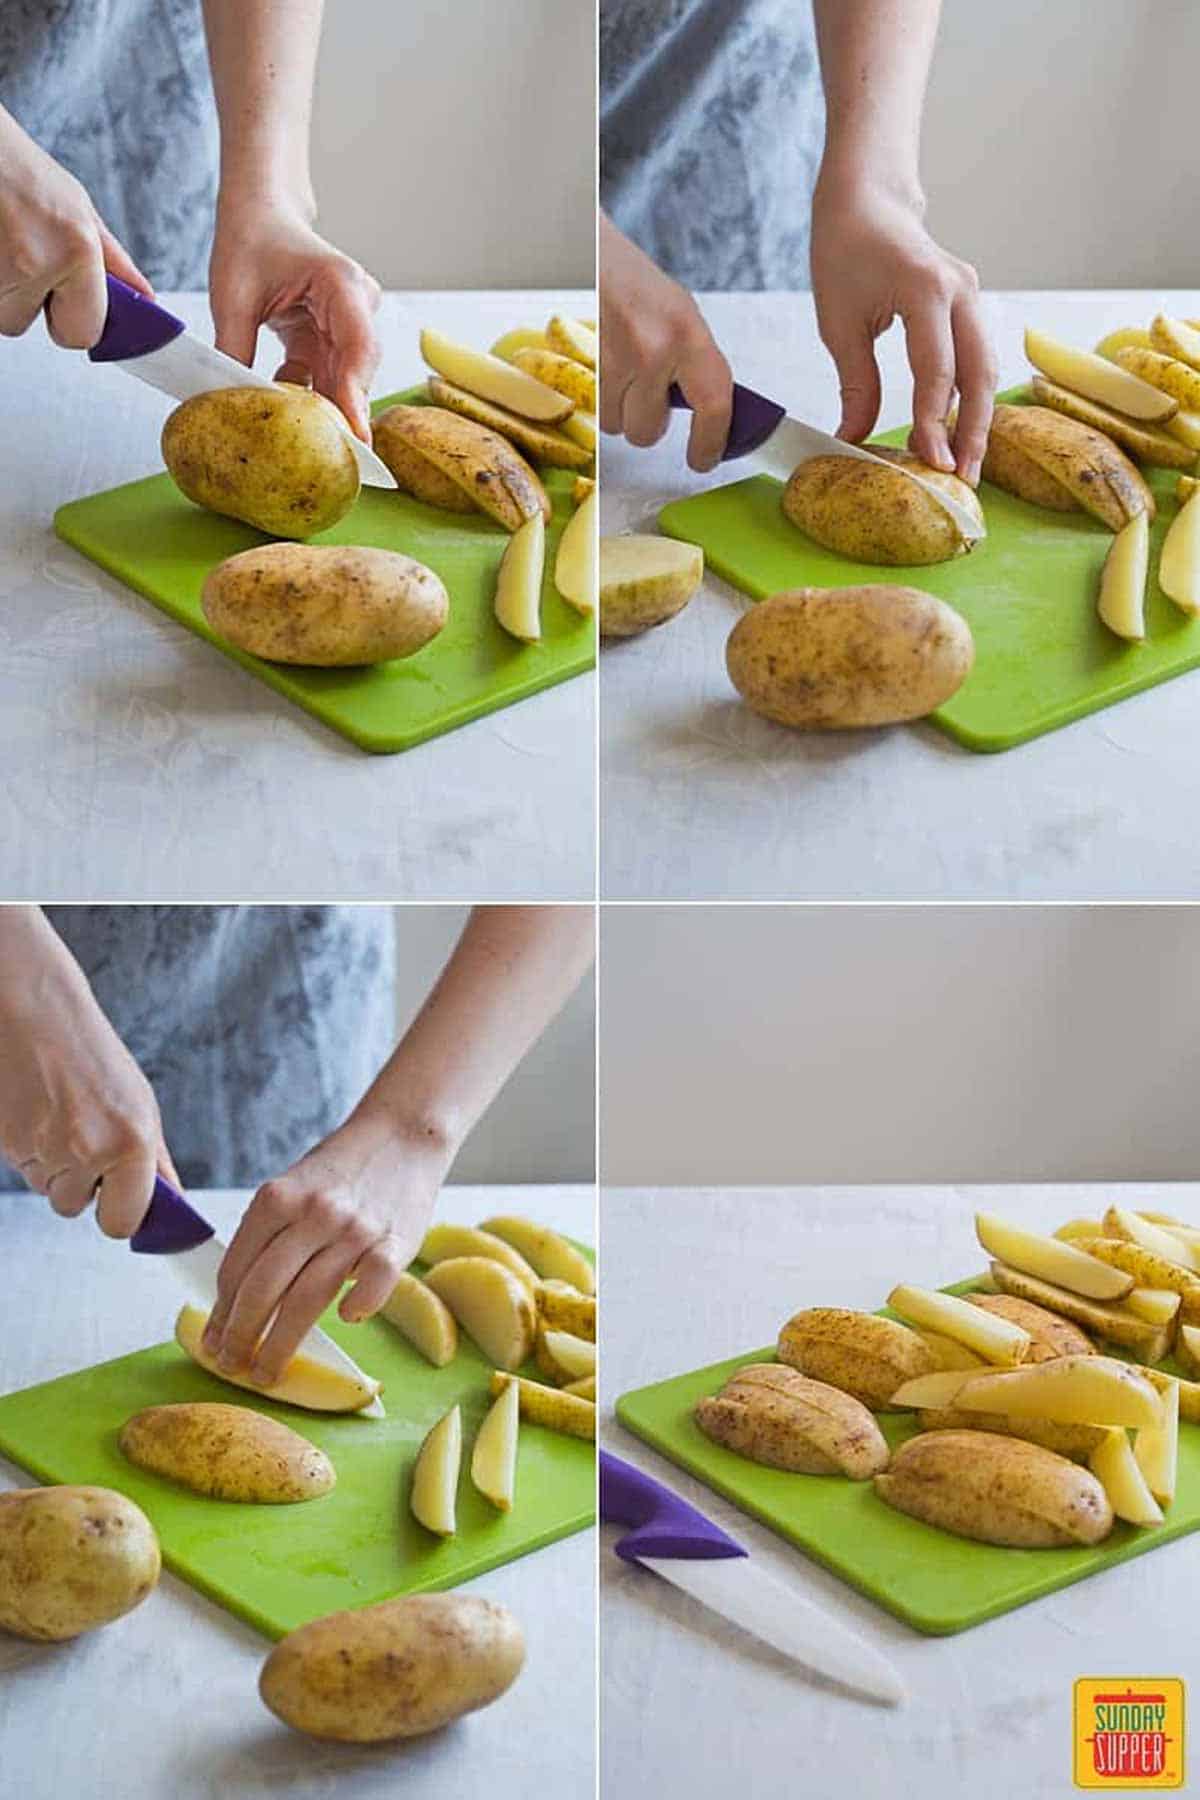 Four images showing how to cut potato wedges: halving the potato, halving the halves, then finally cutting into halves a third time